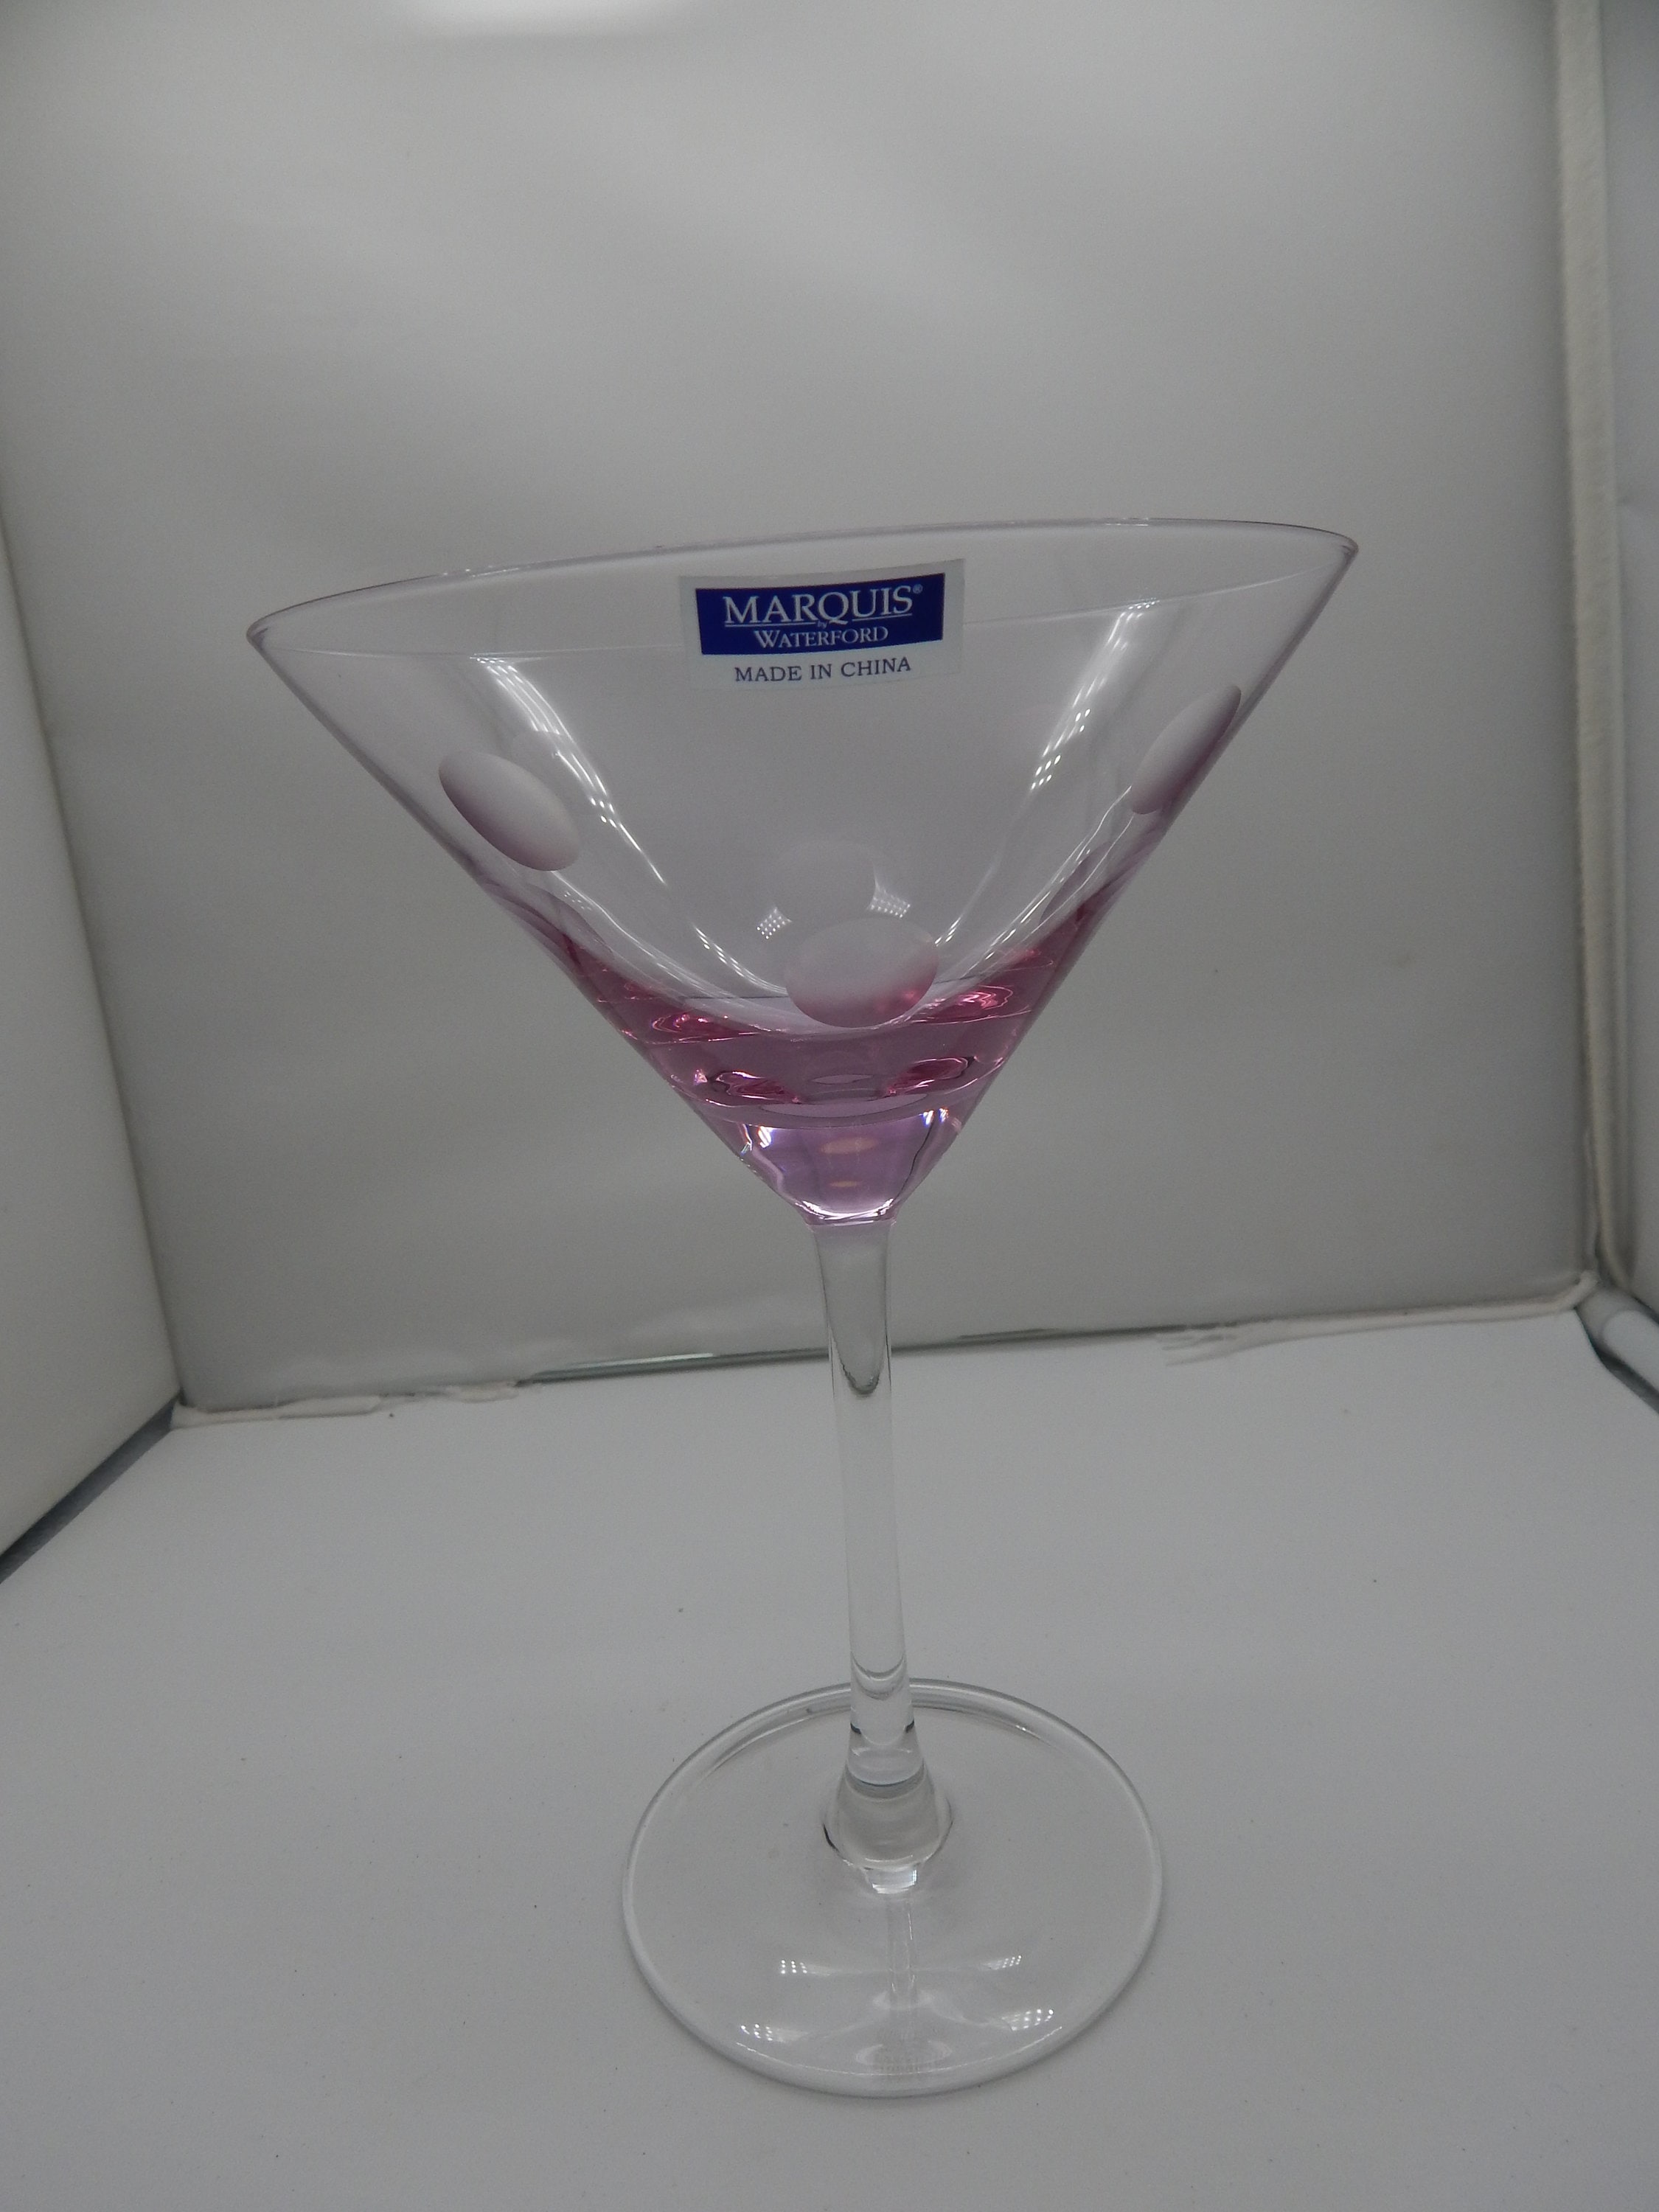 Pink Optic Crystal Martini Glass (Set of 2) by Moser